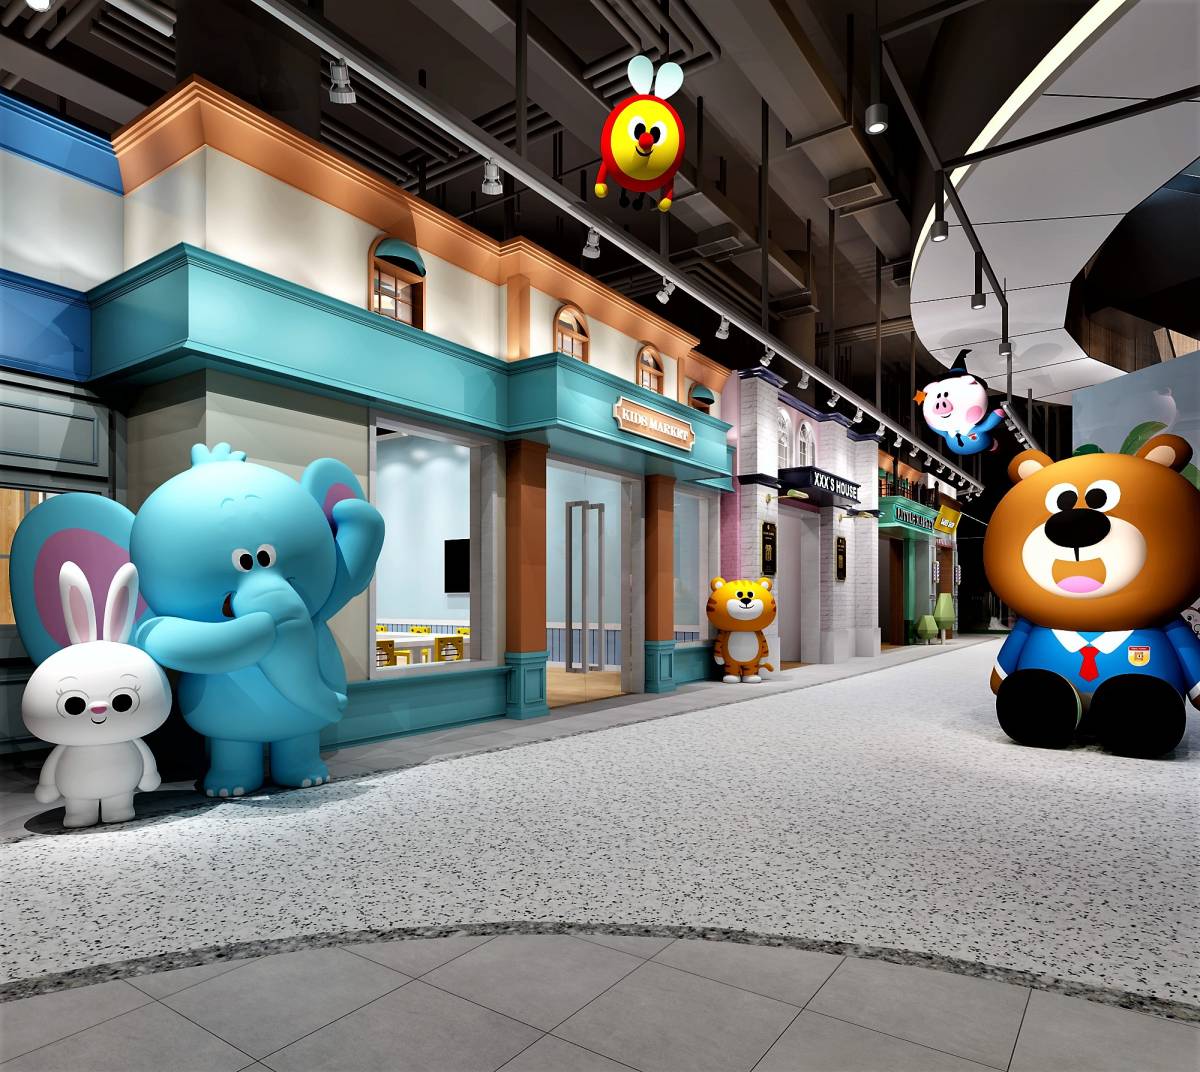 GET READY FOR KIZTOPIA – SINGAPORE’S BIGGEST INDOOR EDUTAINMENT PLAYGROUND IN A SHOPPING MALL, TO OPEN AT MARINA SQUARE